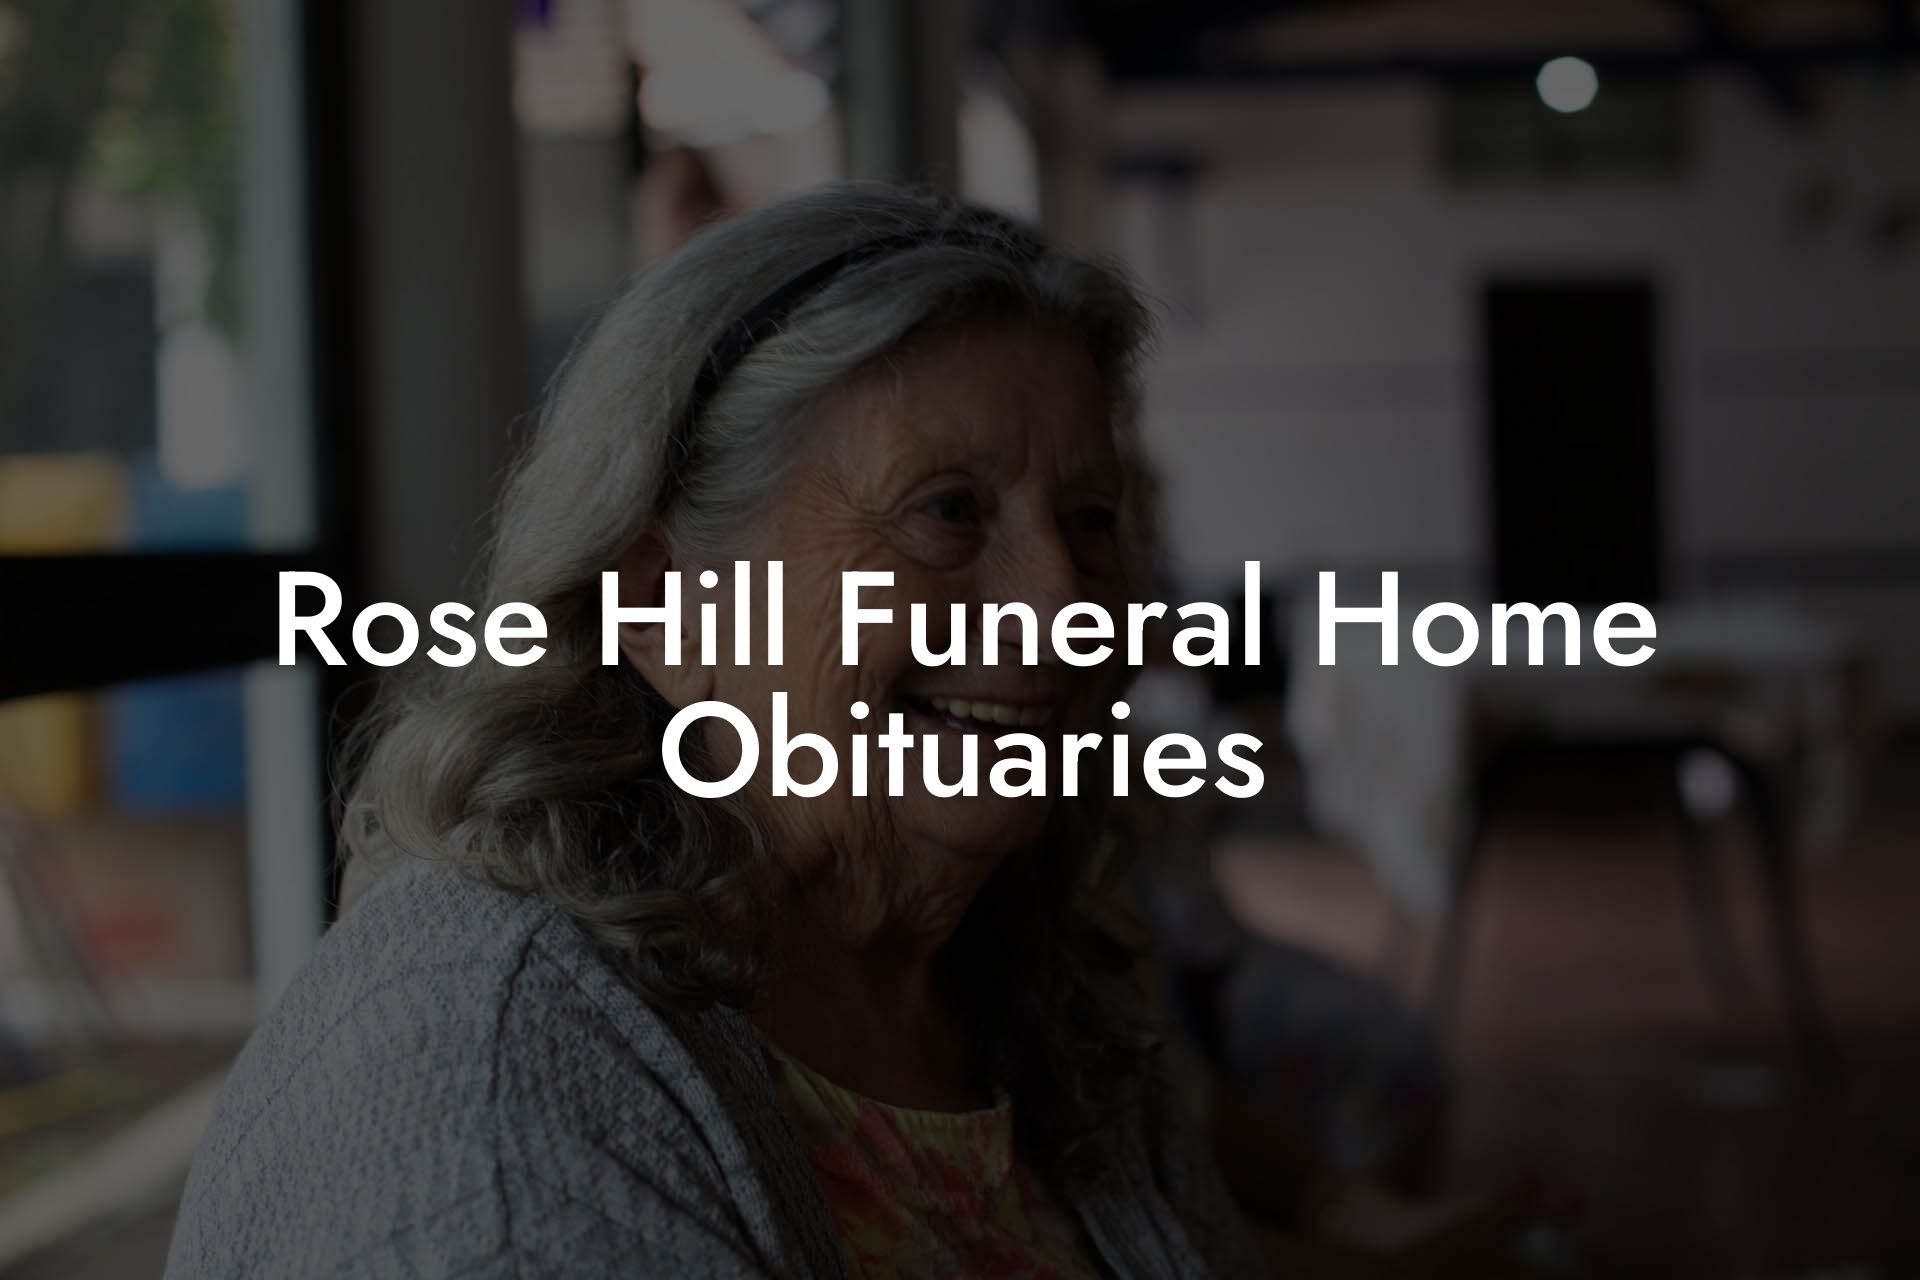 Rose Hill Funeral Home Obituaries